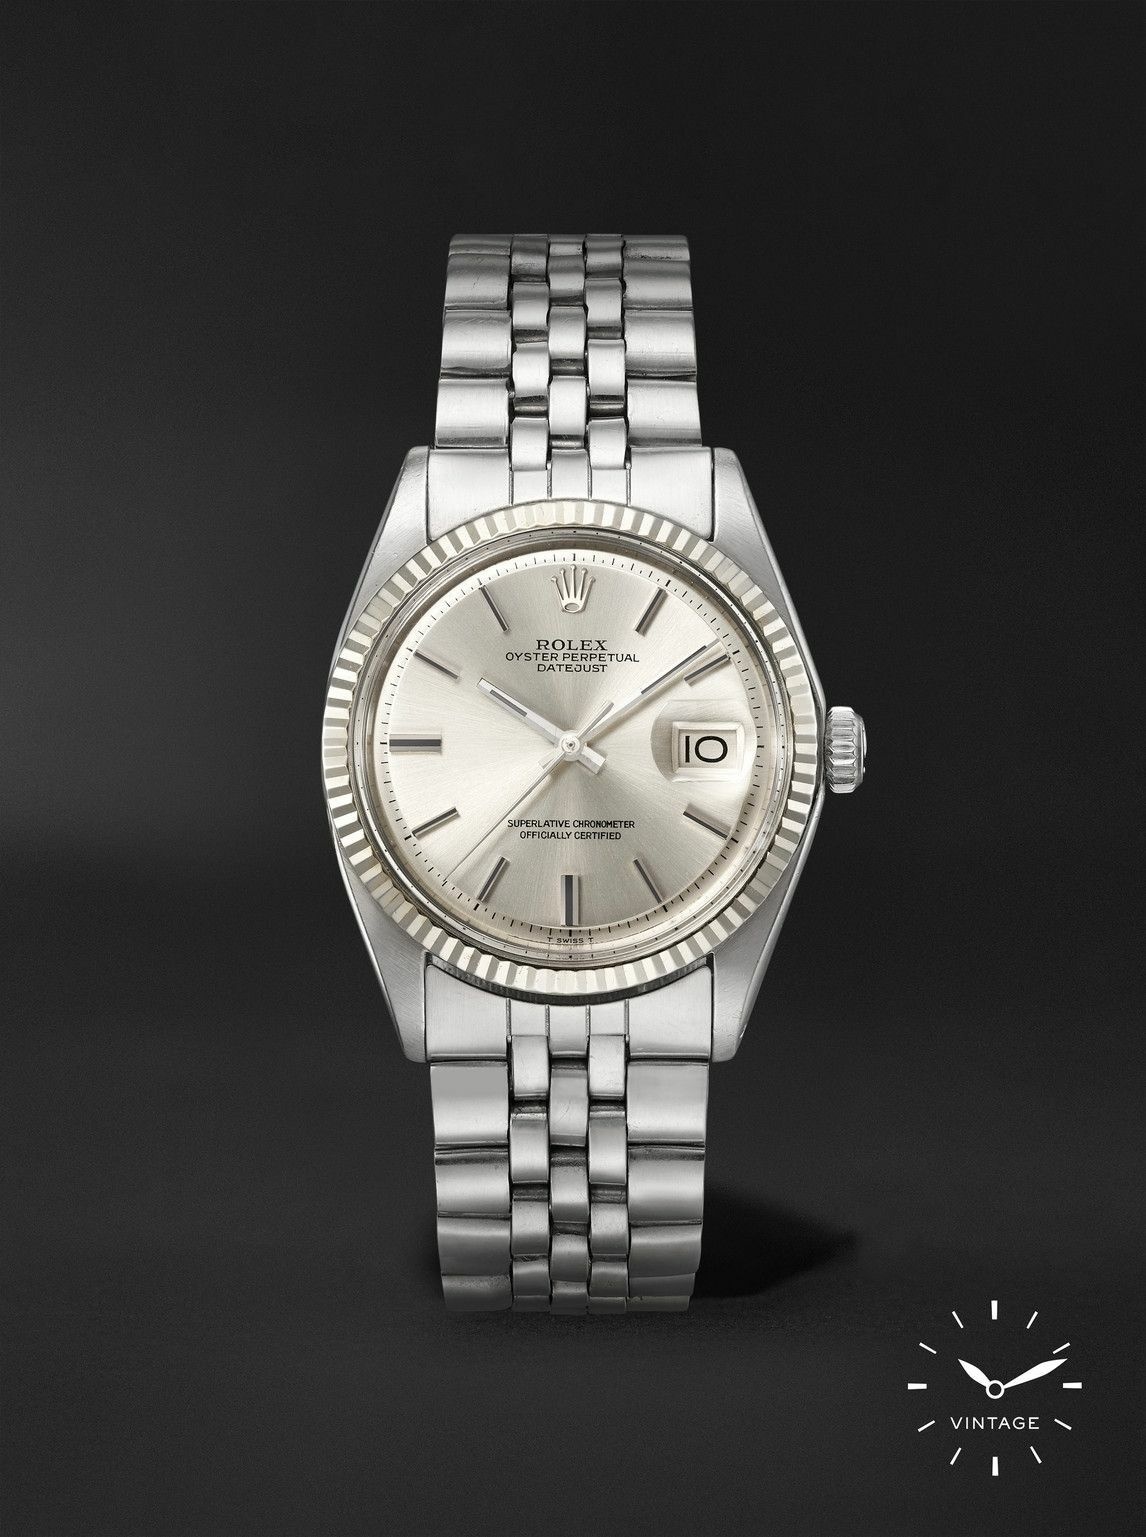 Photo: ROLEX - Pre-Owned Wind Vintage 1972 Datejust Automatic 36mm Stainless Steel Watch, Ref. No. 1601